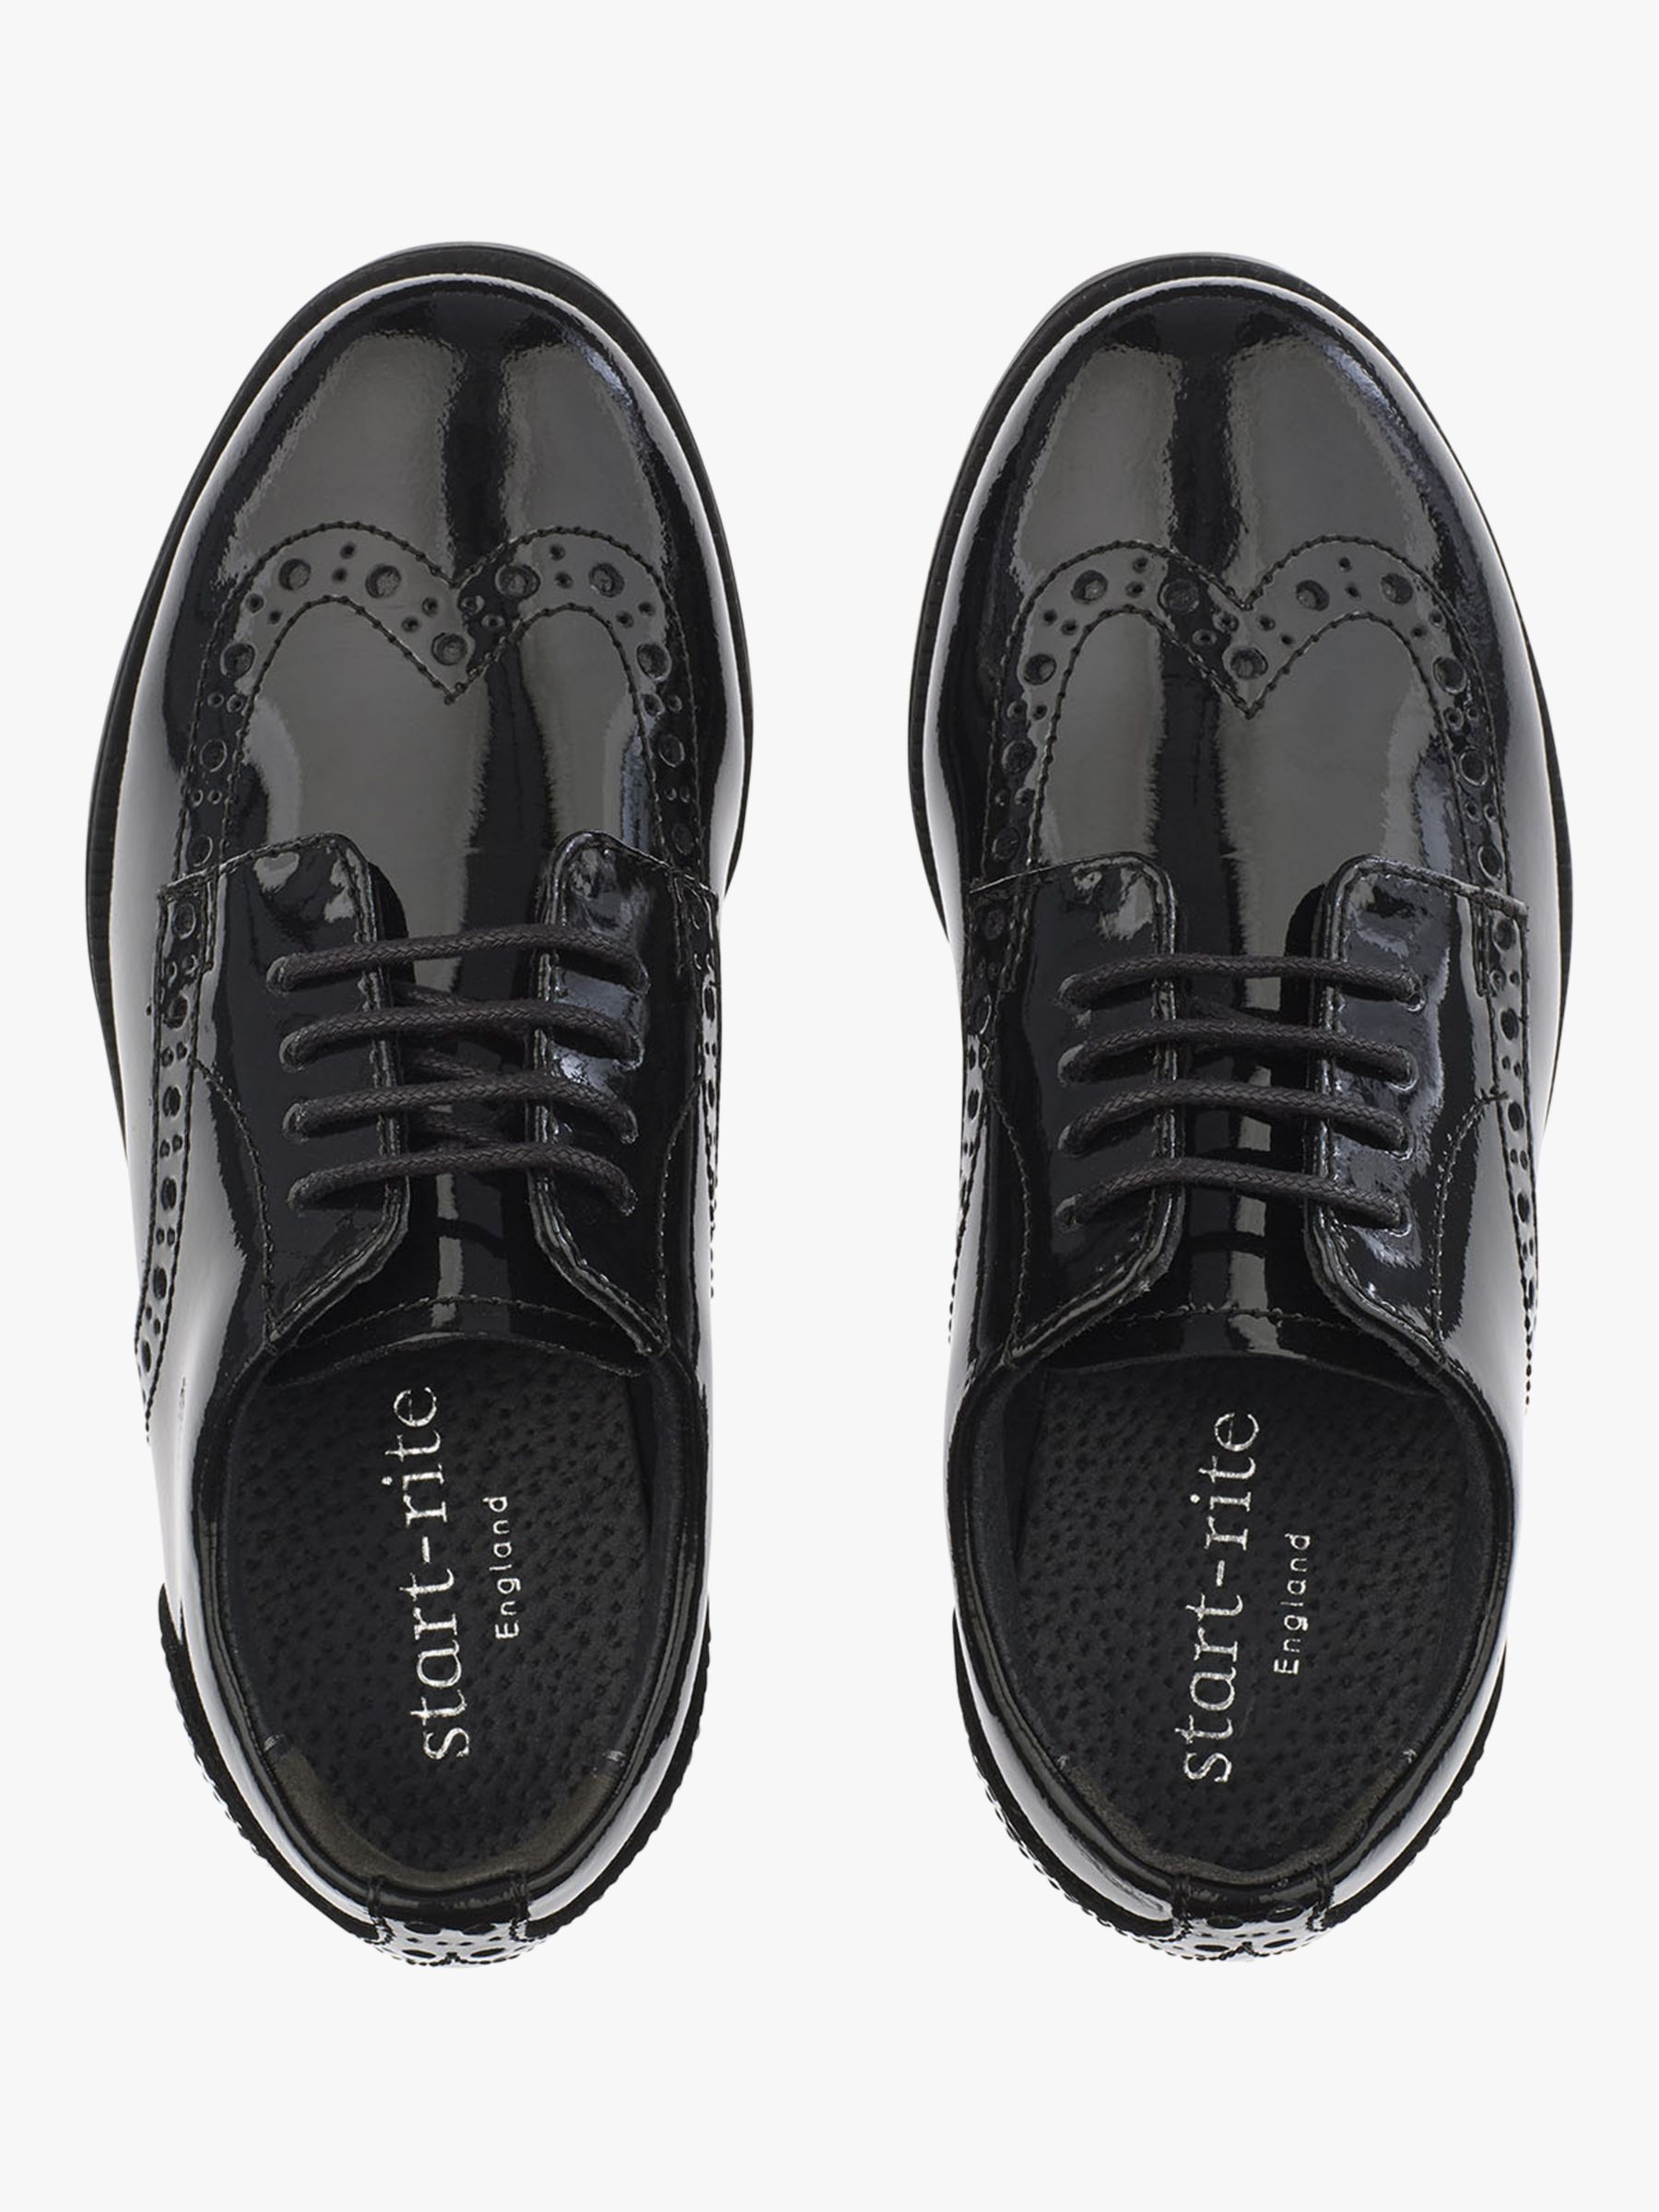 Start-Rite Kids' Leather Brogue Shoes at John Lewis & Partners